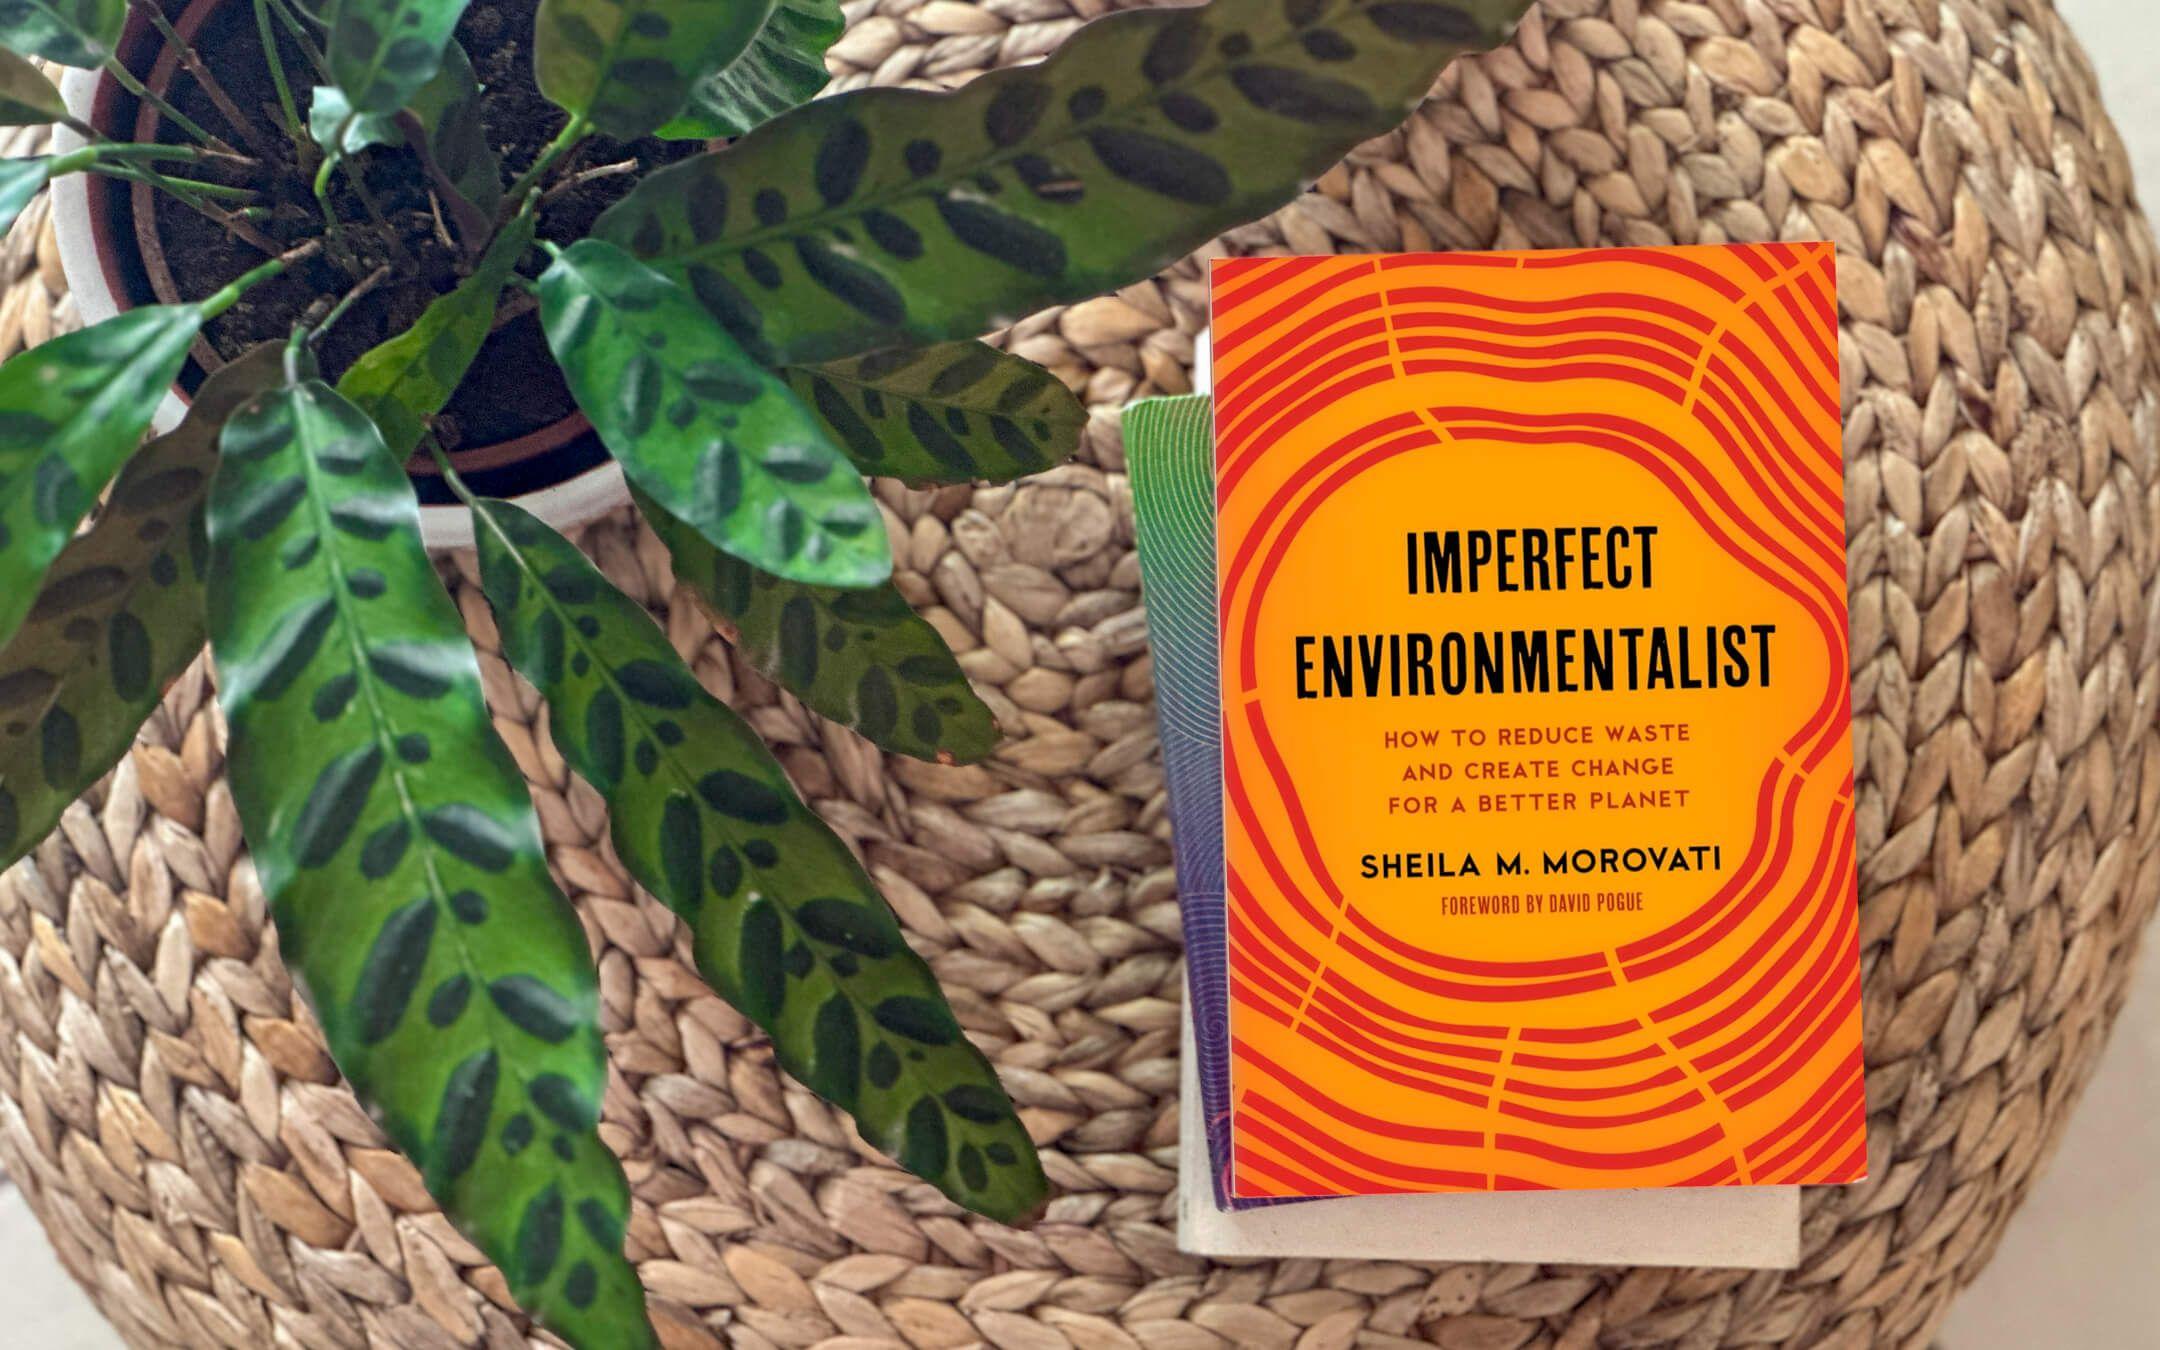 A how-to guide for the imperfect but curious, budding environmentalist. 
Photographer: Sheila Morovati